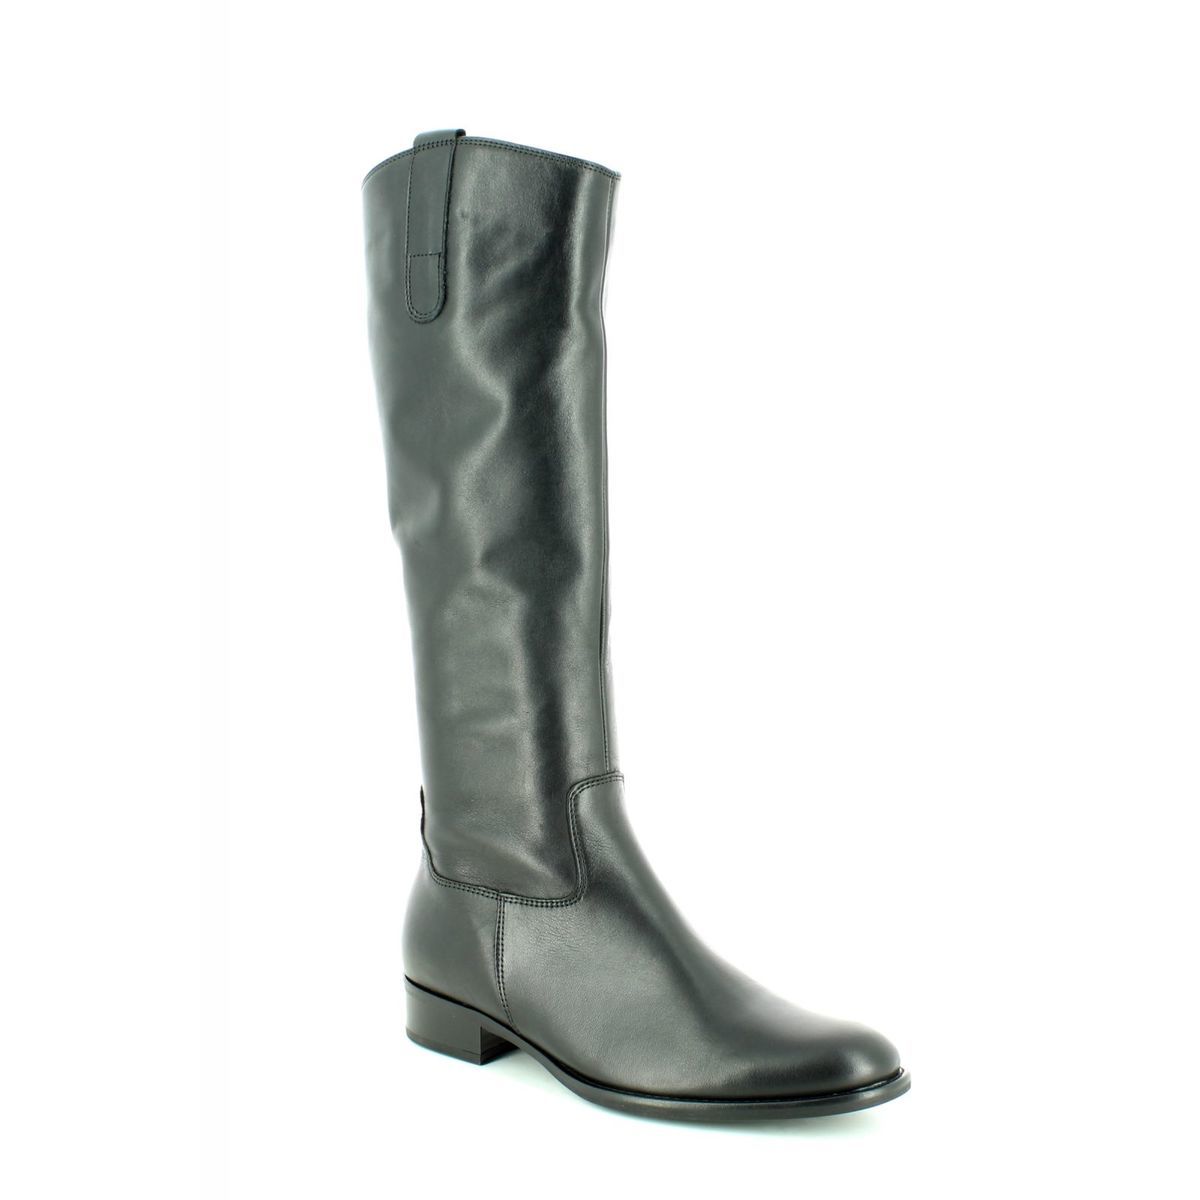 slim fit boots knee high